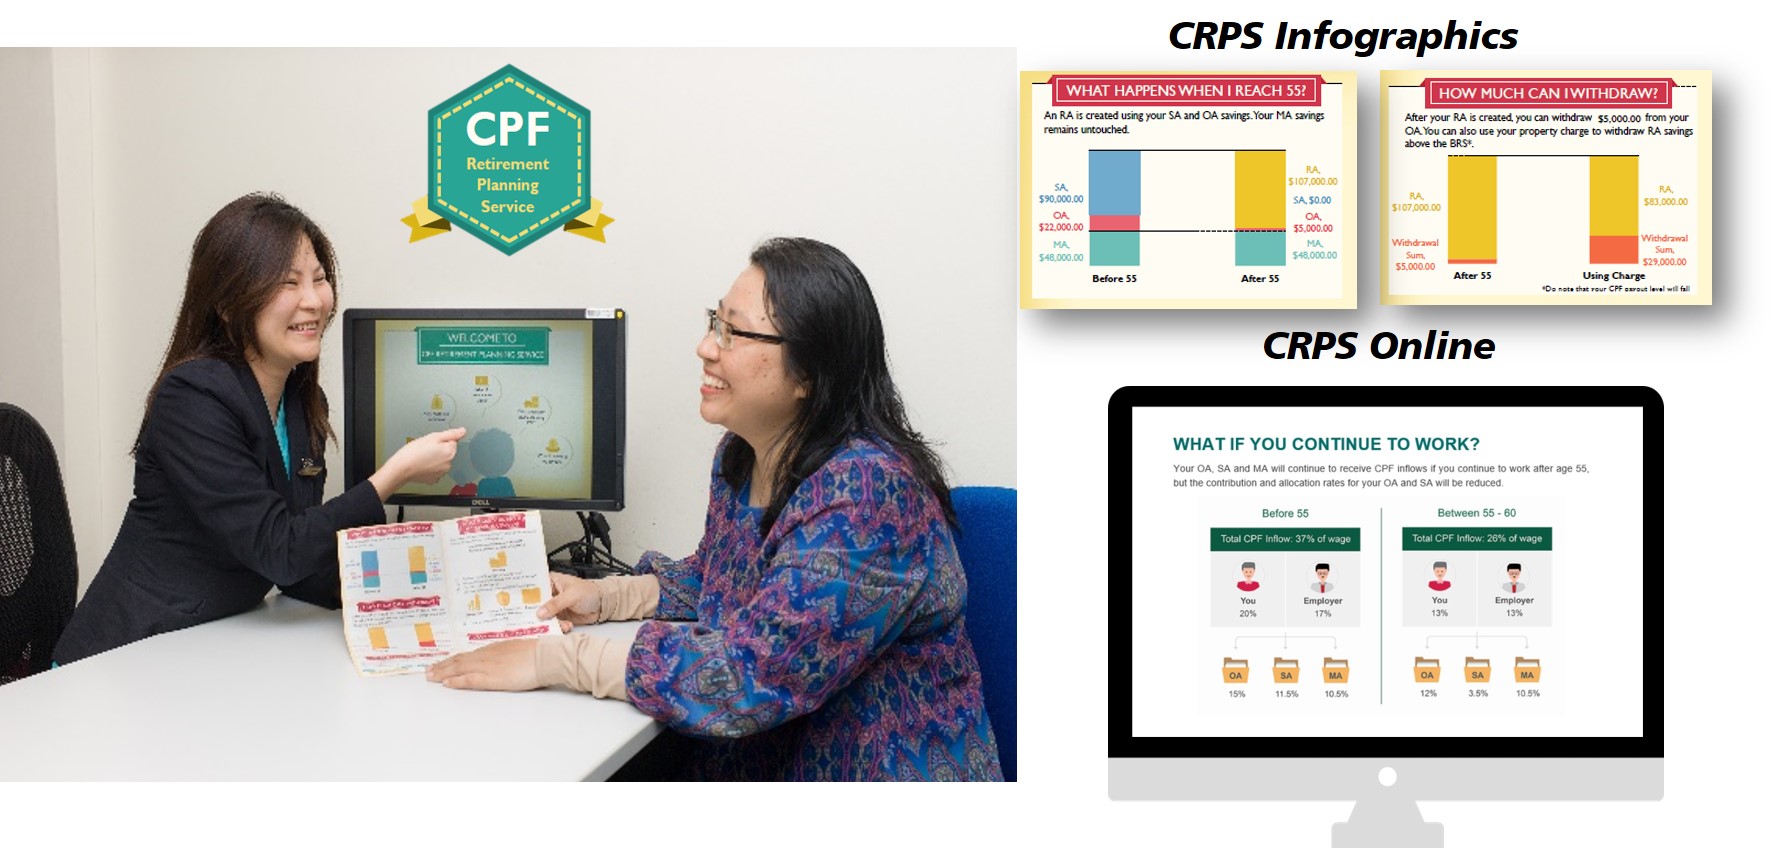 Transformation of Service Experience at the CPF Bishan Service Centre